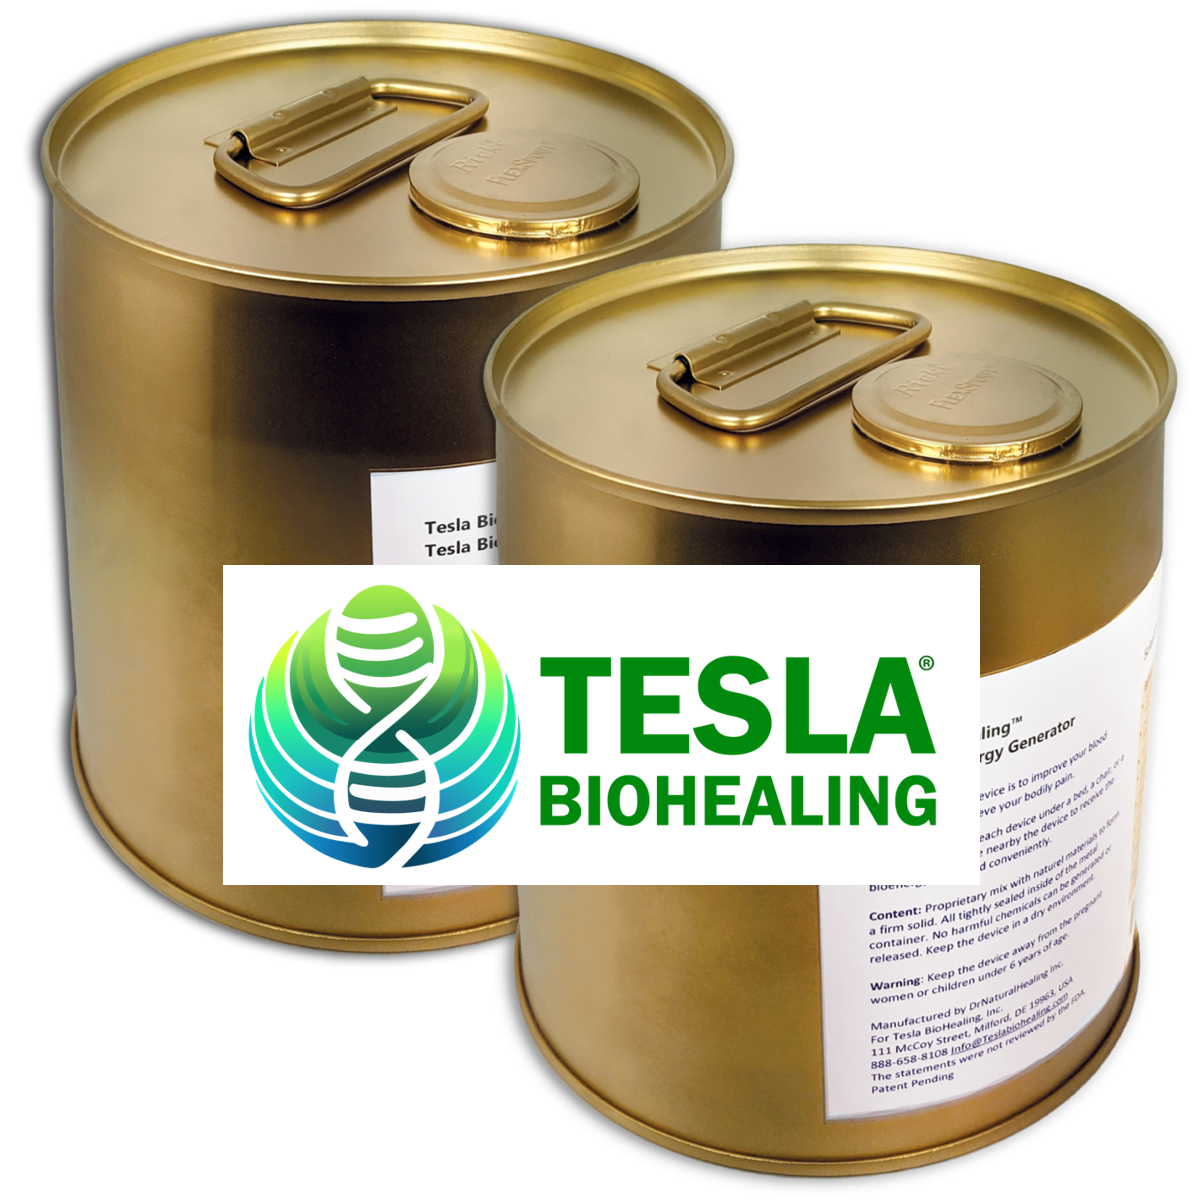 Clinical Studies Highlight the Potential of Tesla BioHealing Biophoton Generator in Improving Mobility for Chronic Stroke Patients